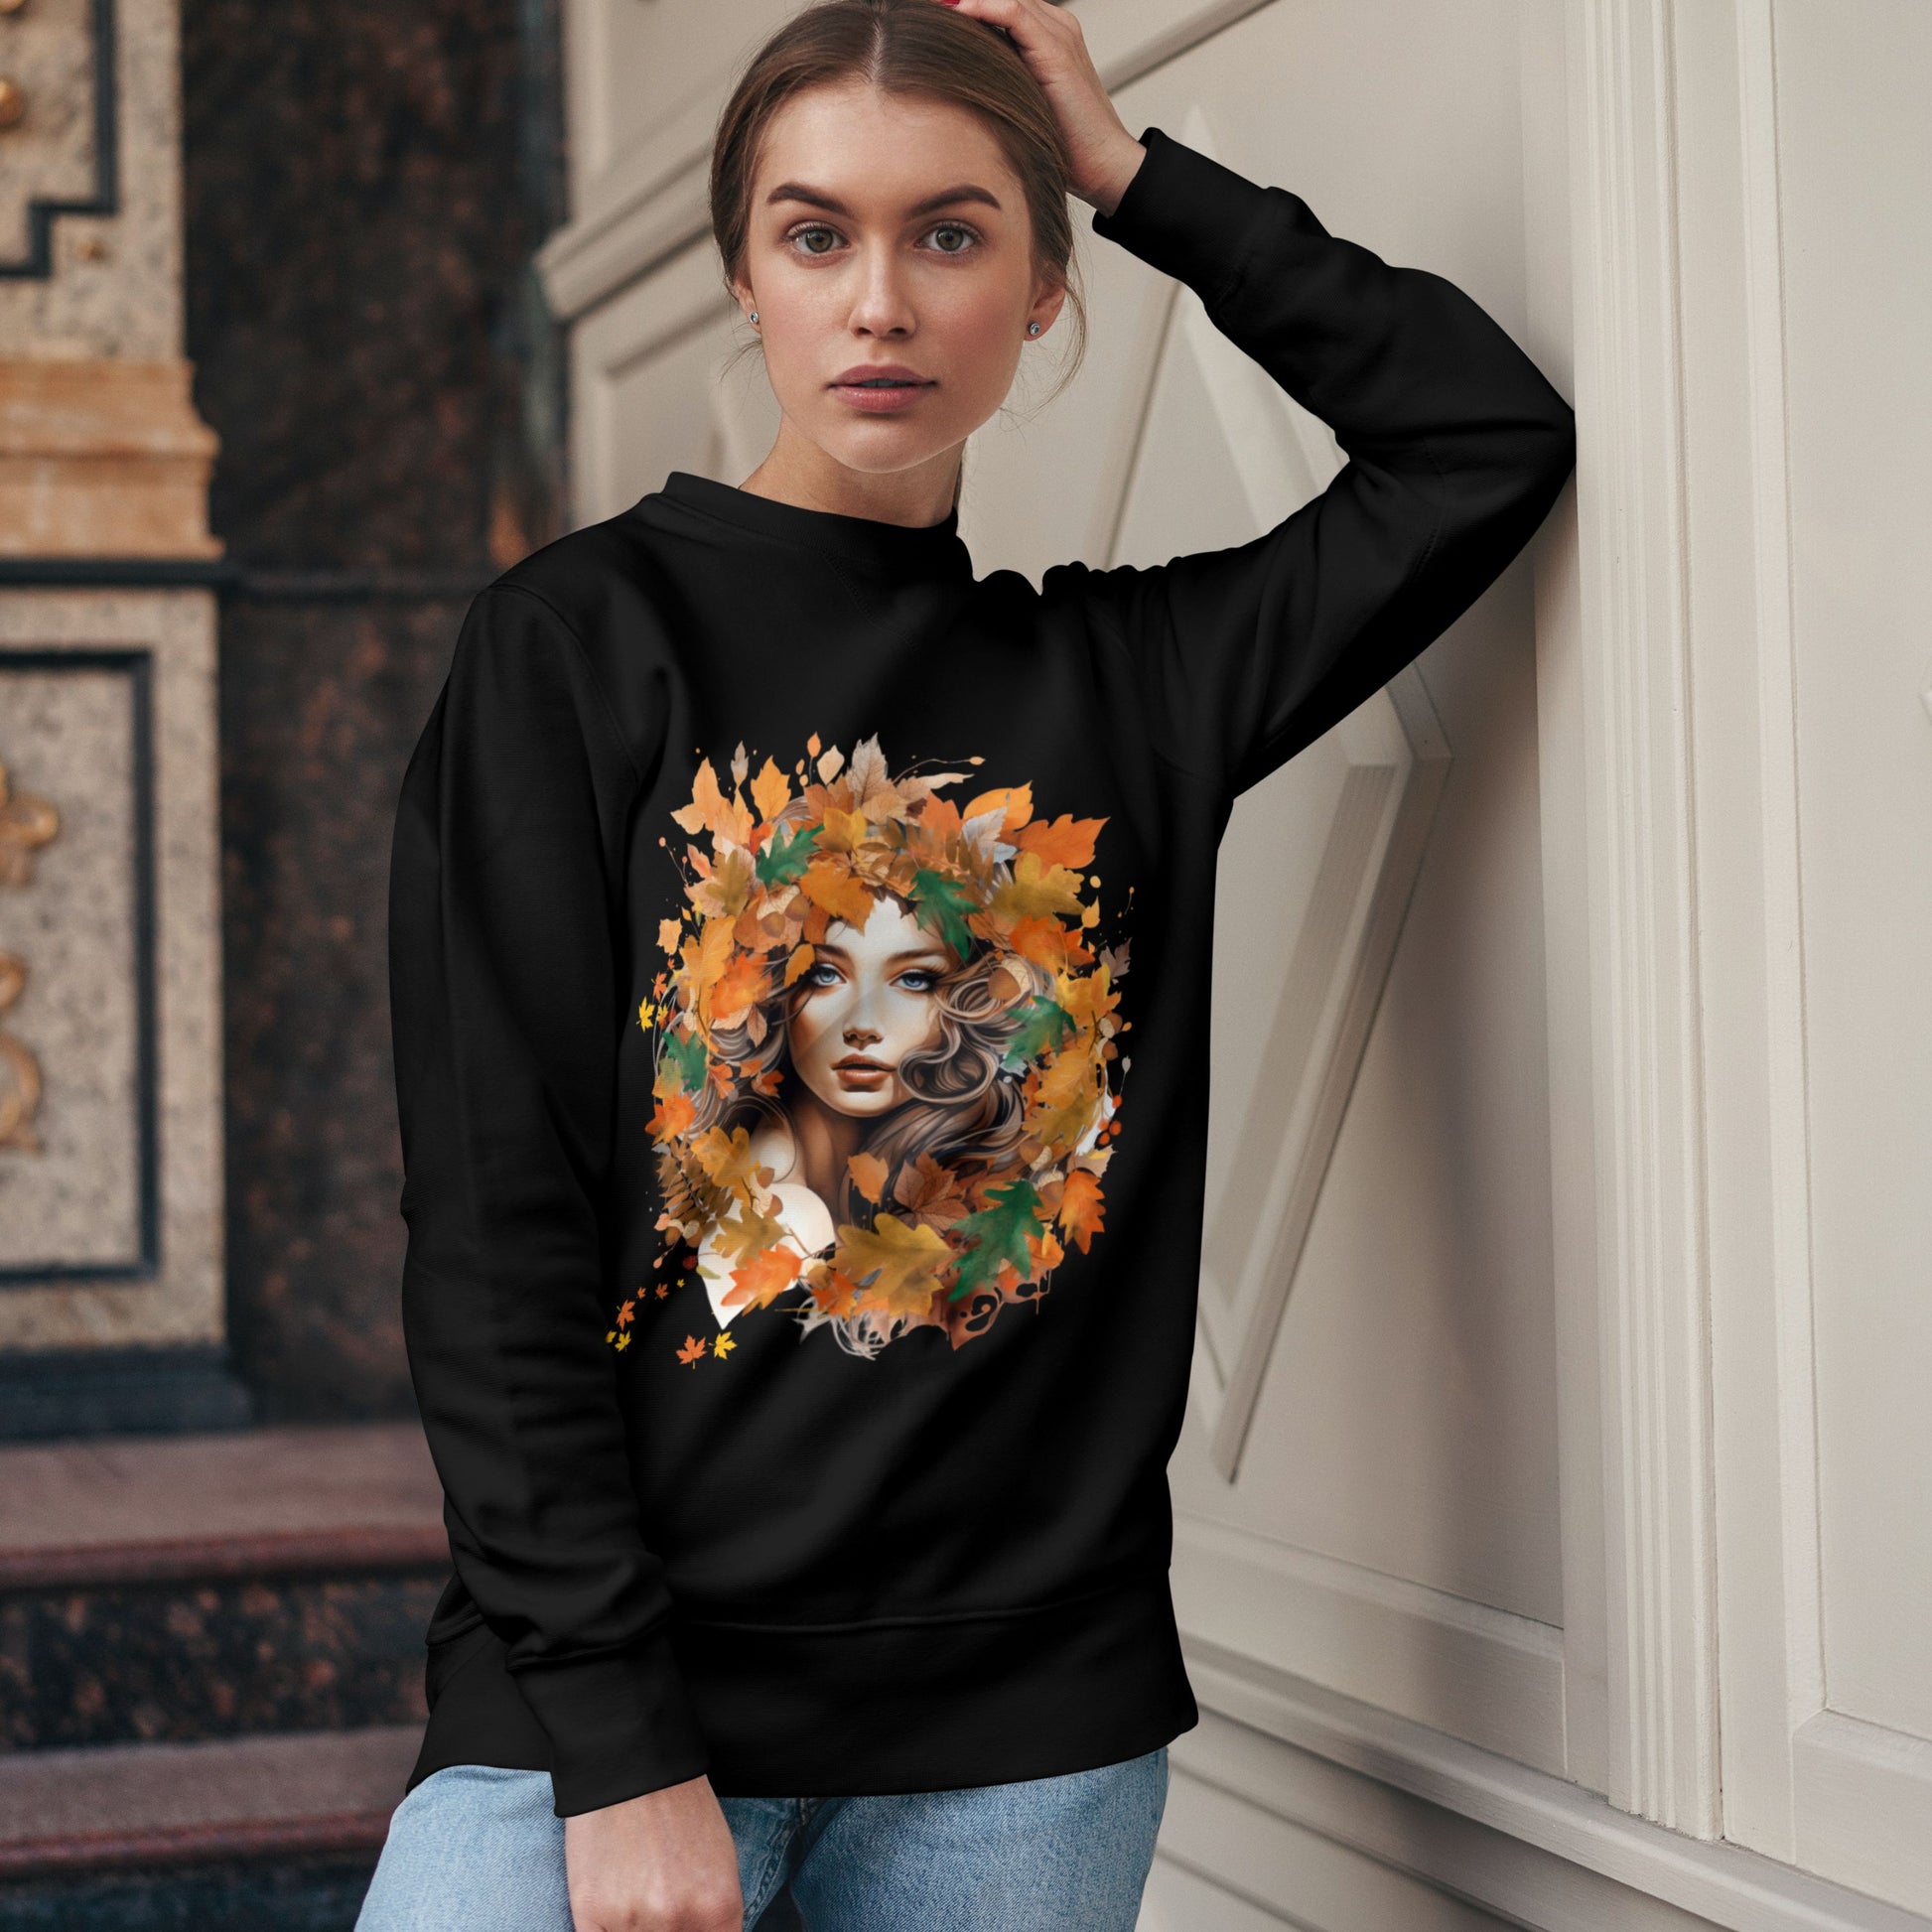 Whimsical Dreams in Autumn Hues: Romantic Dreamy Female Surrounded by Autumn Leaves Sweatshirt - Fairycore, Forestcore, Cottagecore-inspired Fashion Sweatshirt   